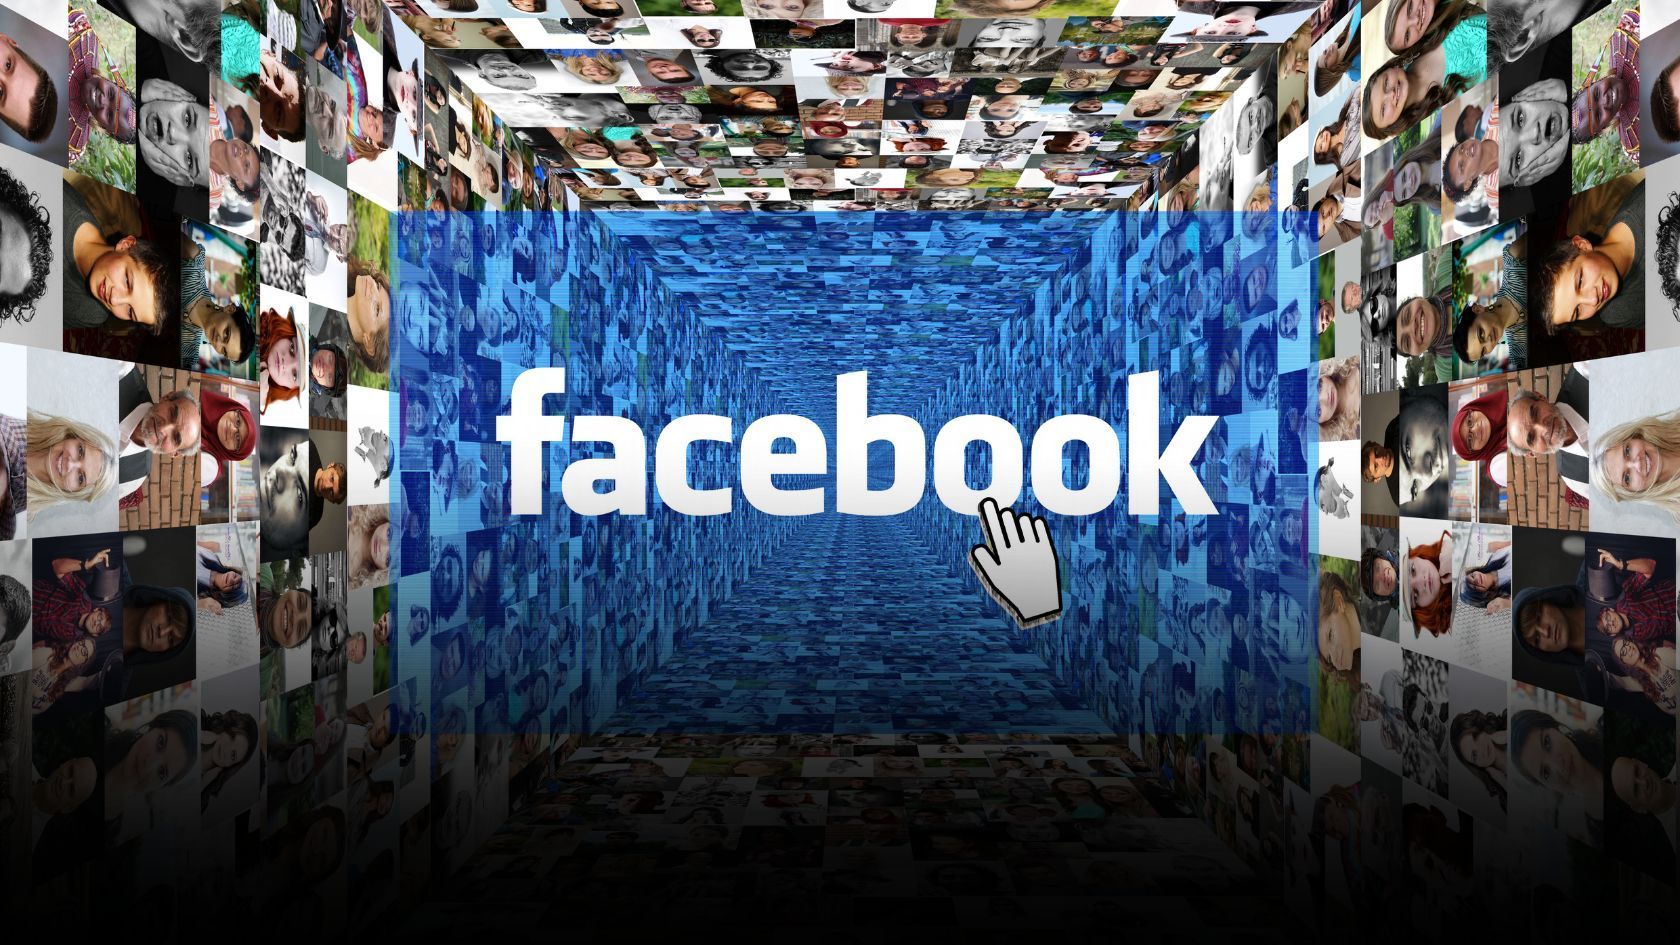 Facebook logo and Facebook users in the background, with a curser on the screen.